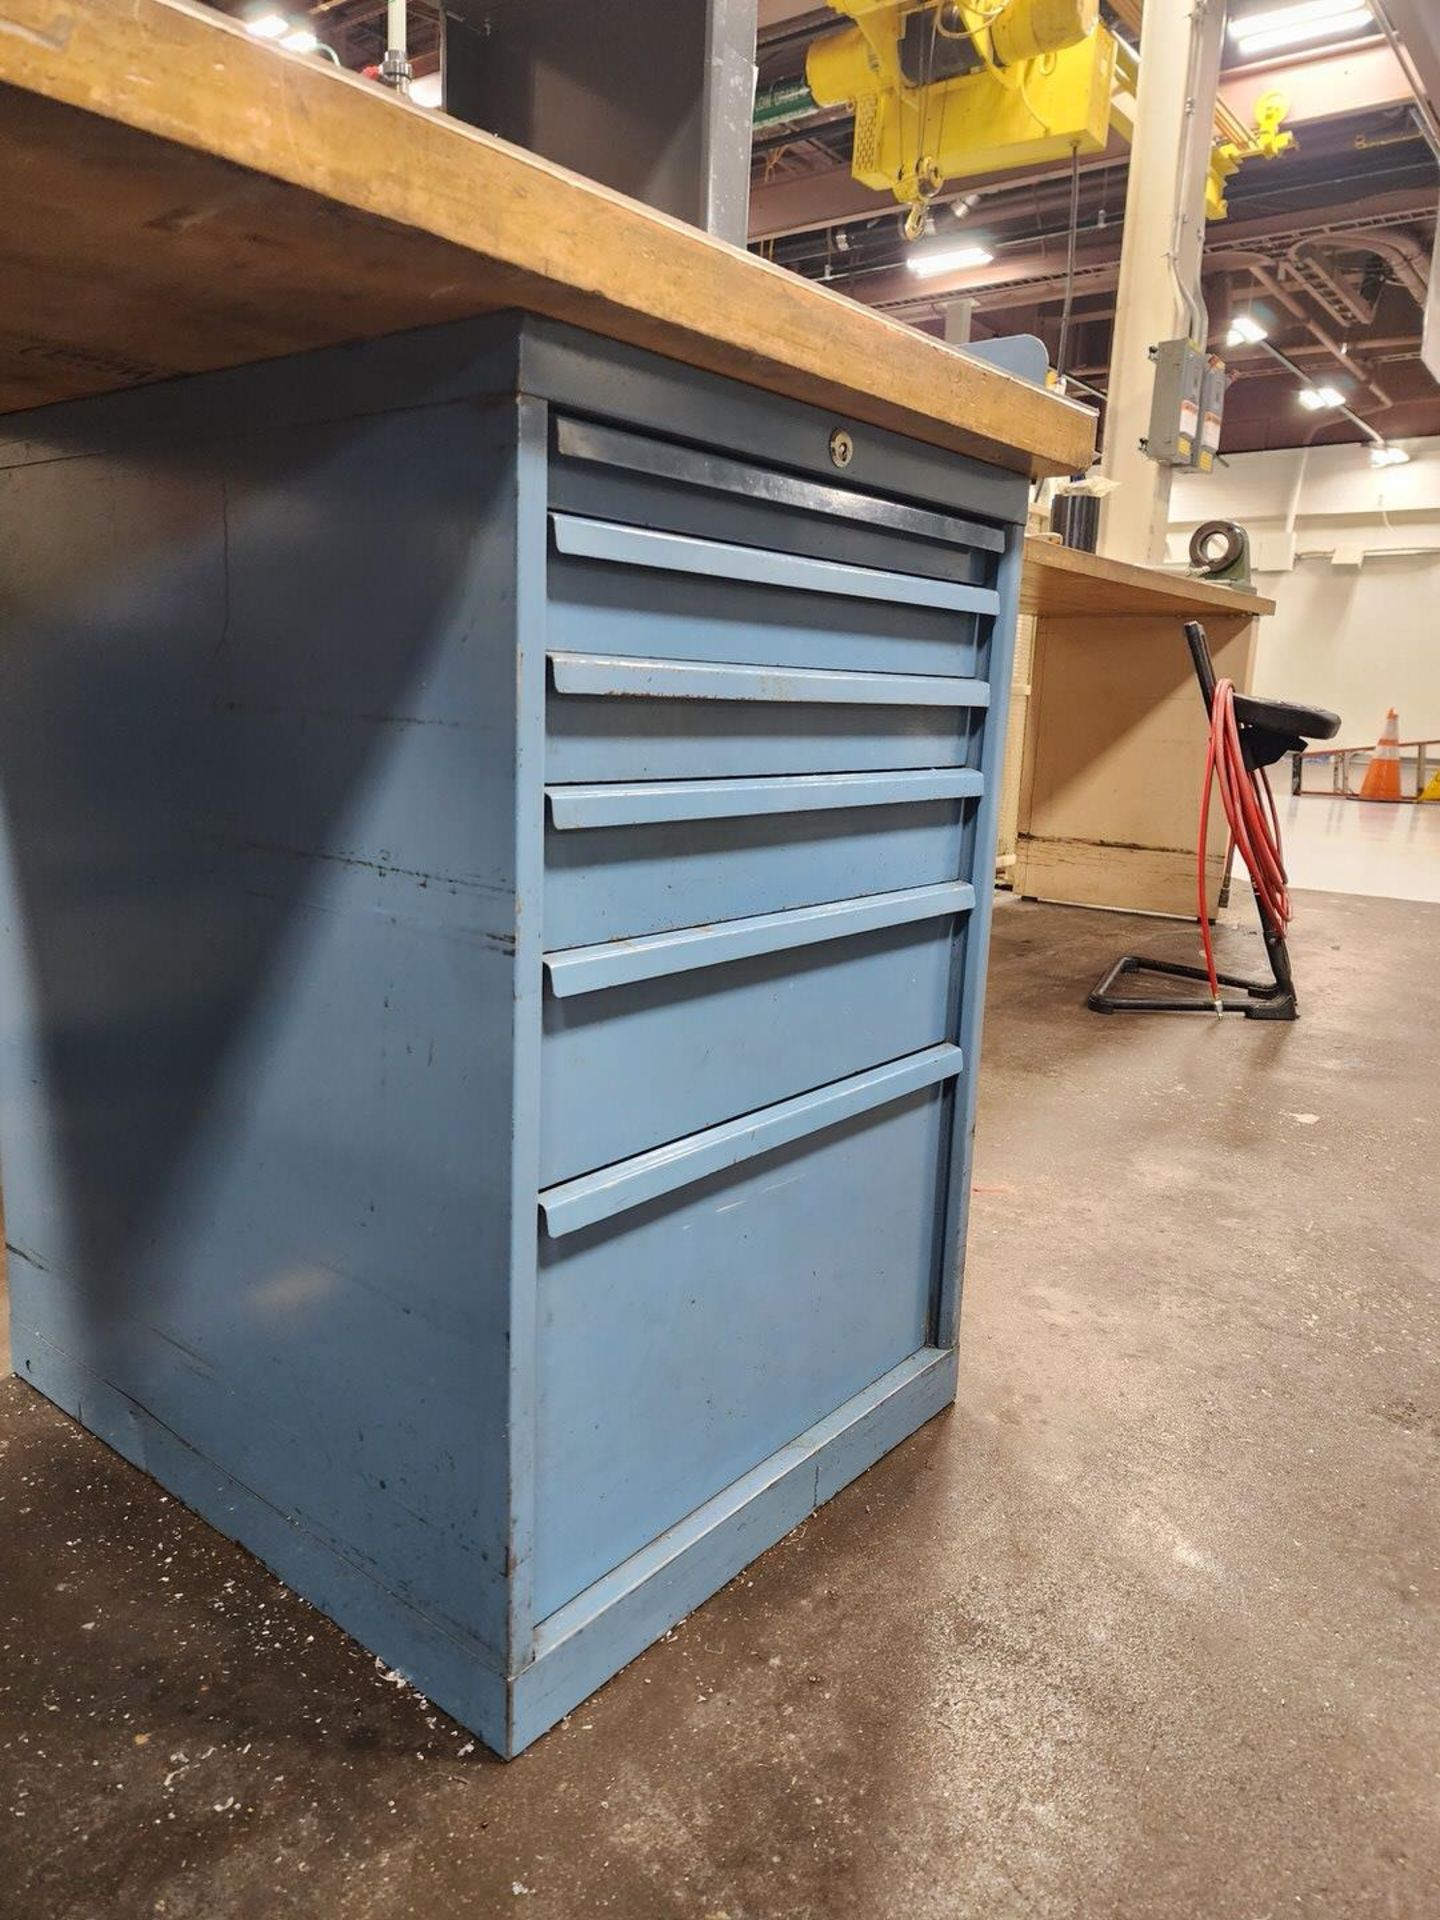 2-Bin Modular Material Cabinet W/ Jig Boring Machine Contents & Other Assorted Contents - Image 17 of 20